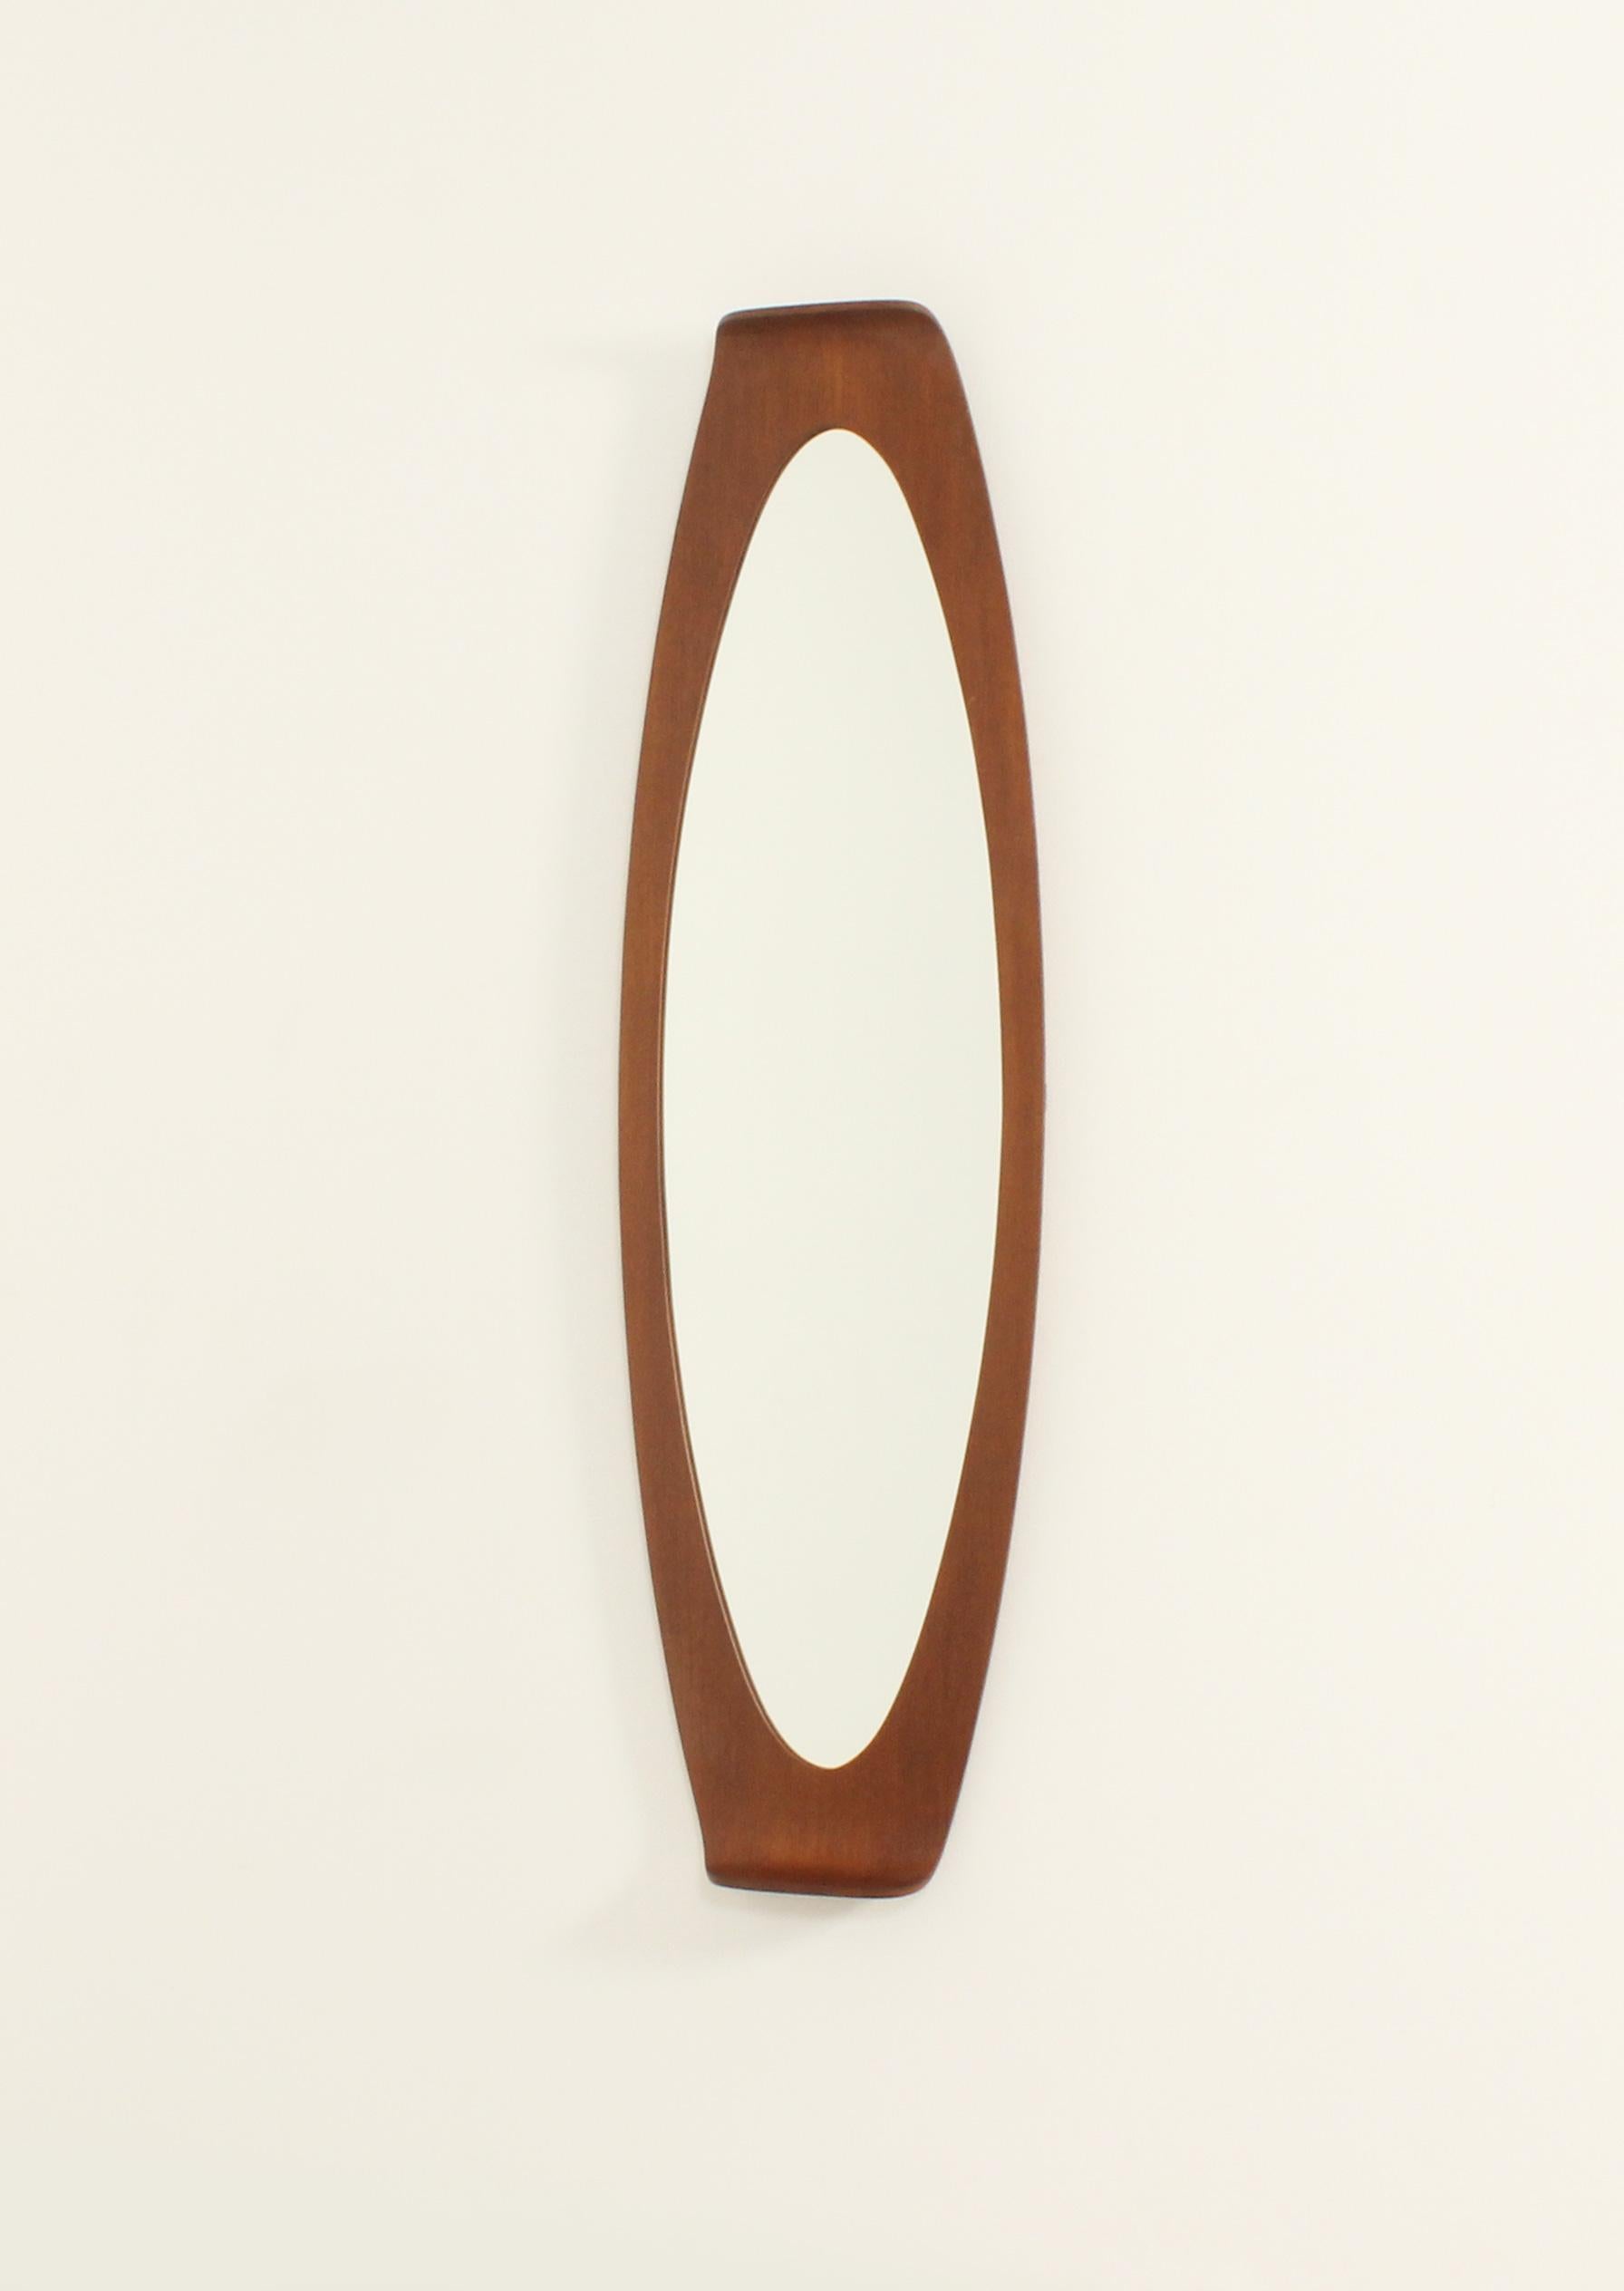 Mid-Century Modern Large Campo & Graffi Wall Mirror for Home, Italy, 1950's For Sale